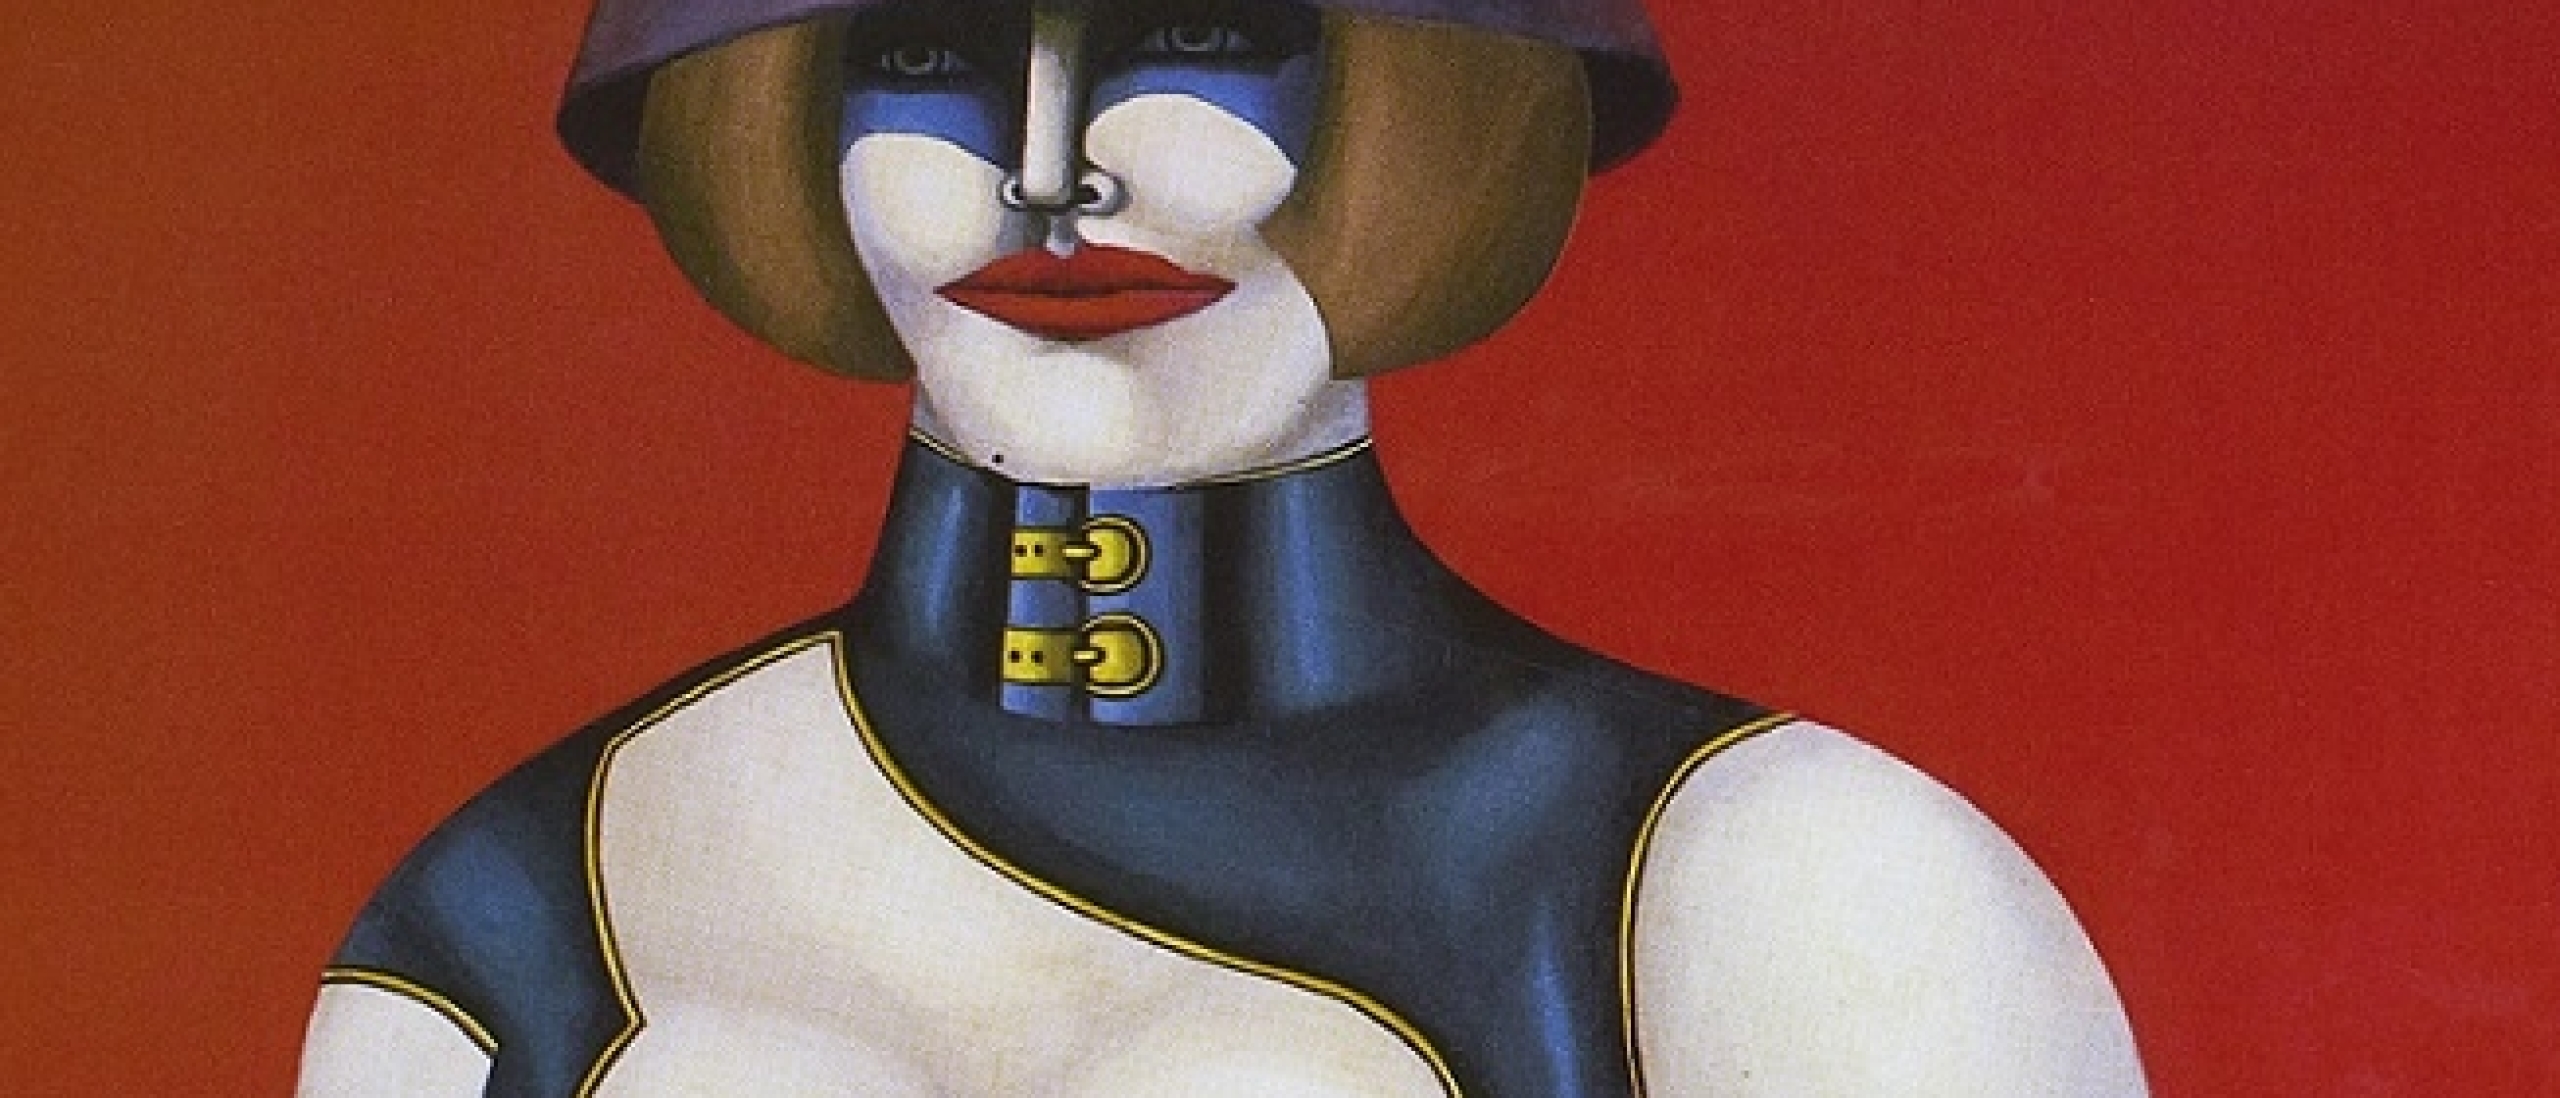 Molinier Meets Malevich: The Fun City Of The American Artist Richard Lindner